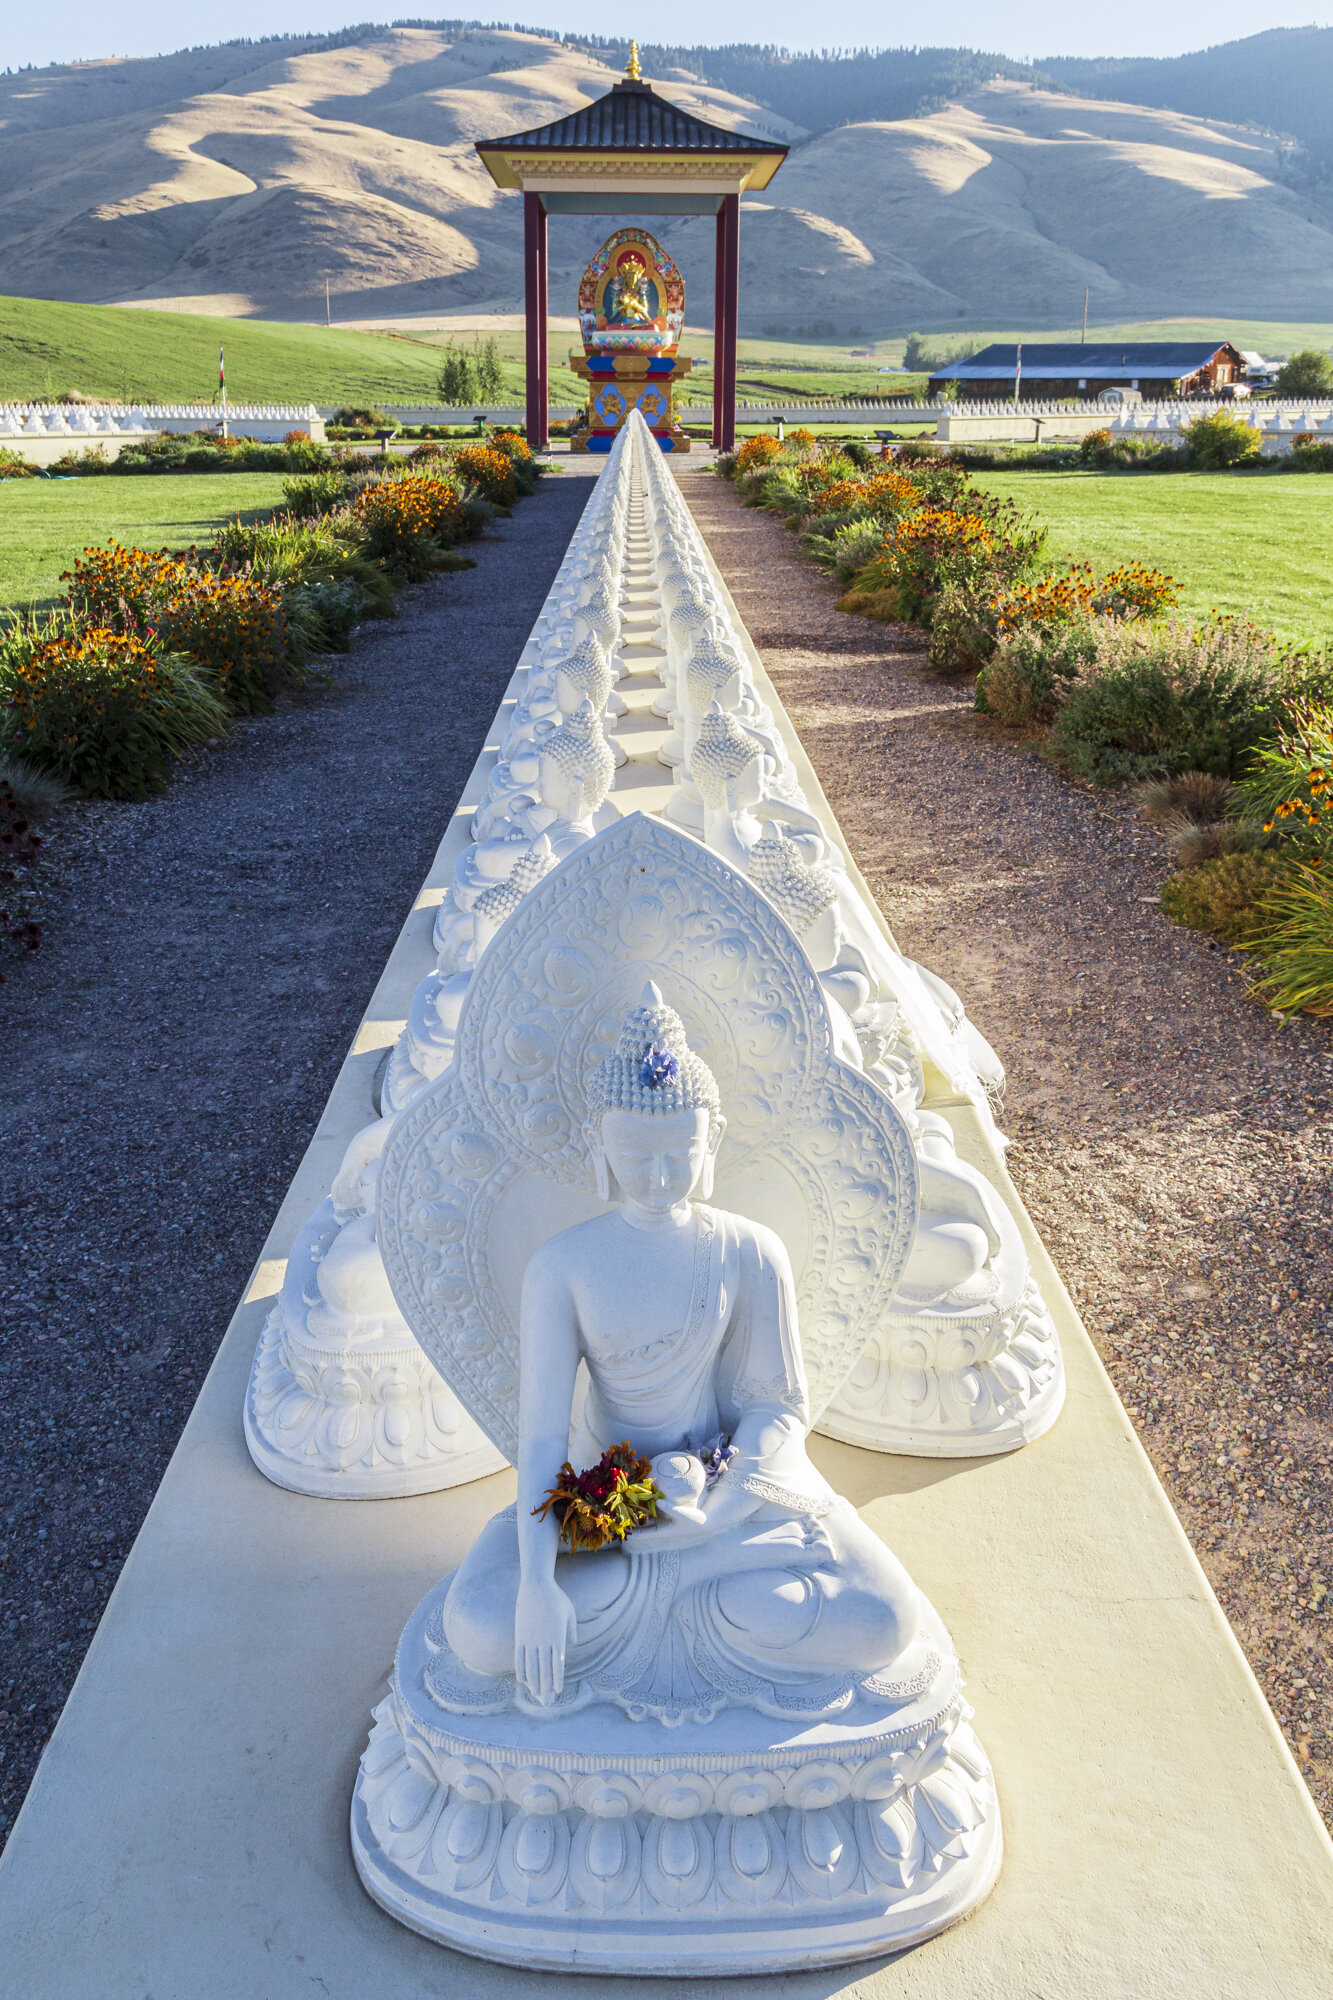 Garden Of One Thousand Buddhas Bright Side Photography